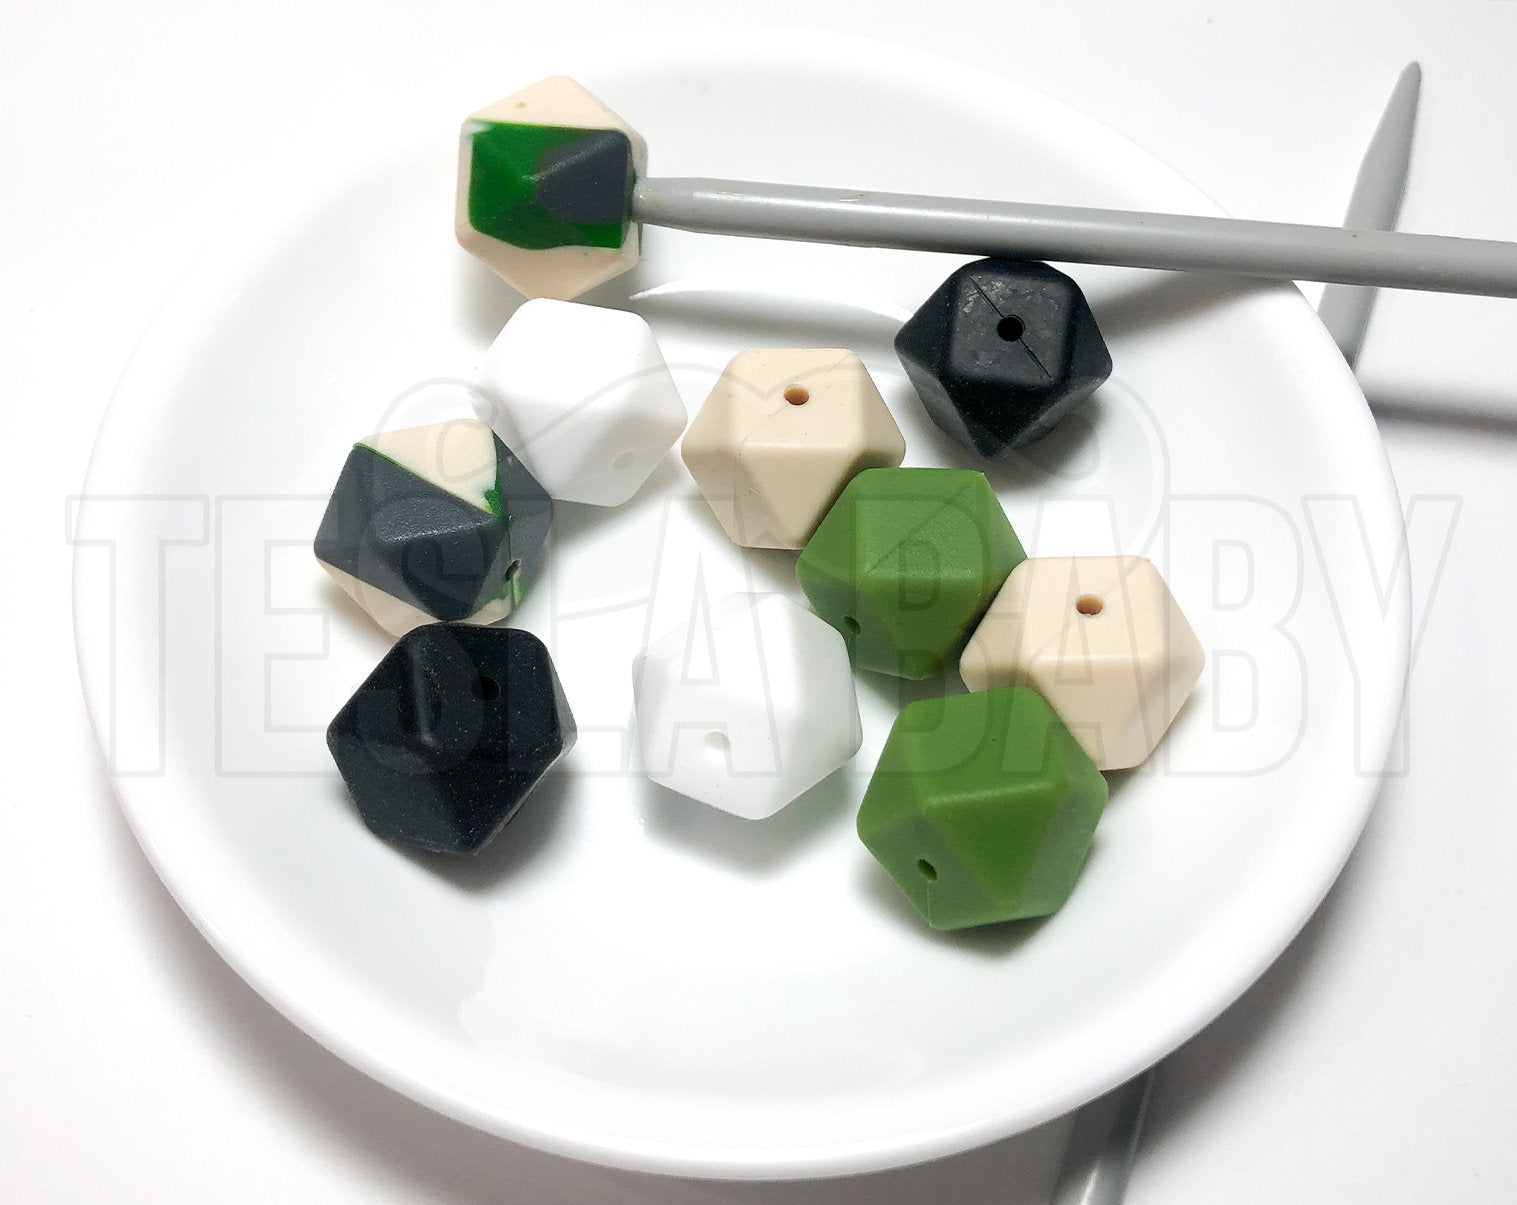 Knitting Needle Stoppers - Army Camo - Beader Caps - Beader Tips - Back Stoppers - Point Protectors - End Stoppers - Stitch Holder